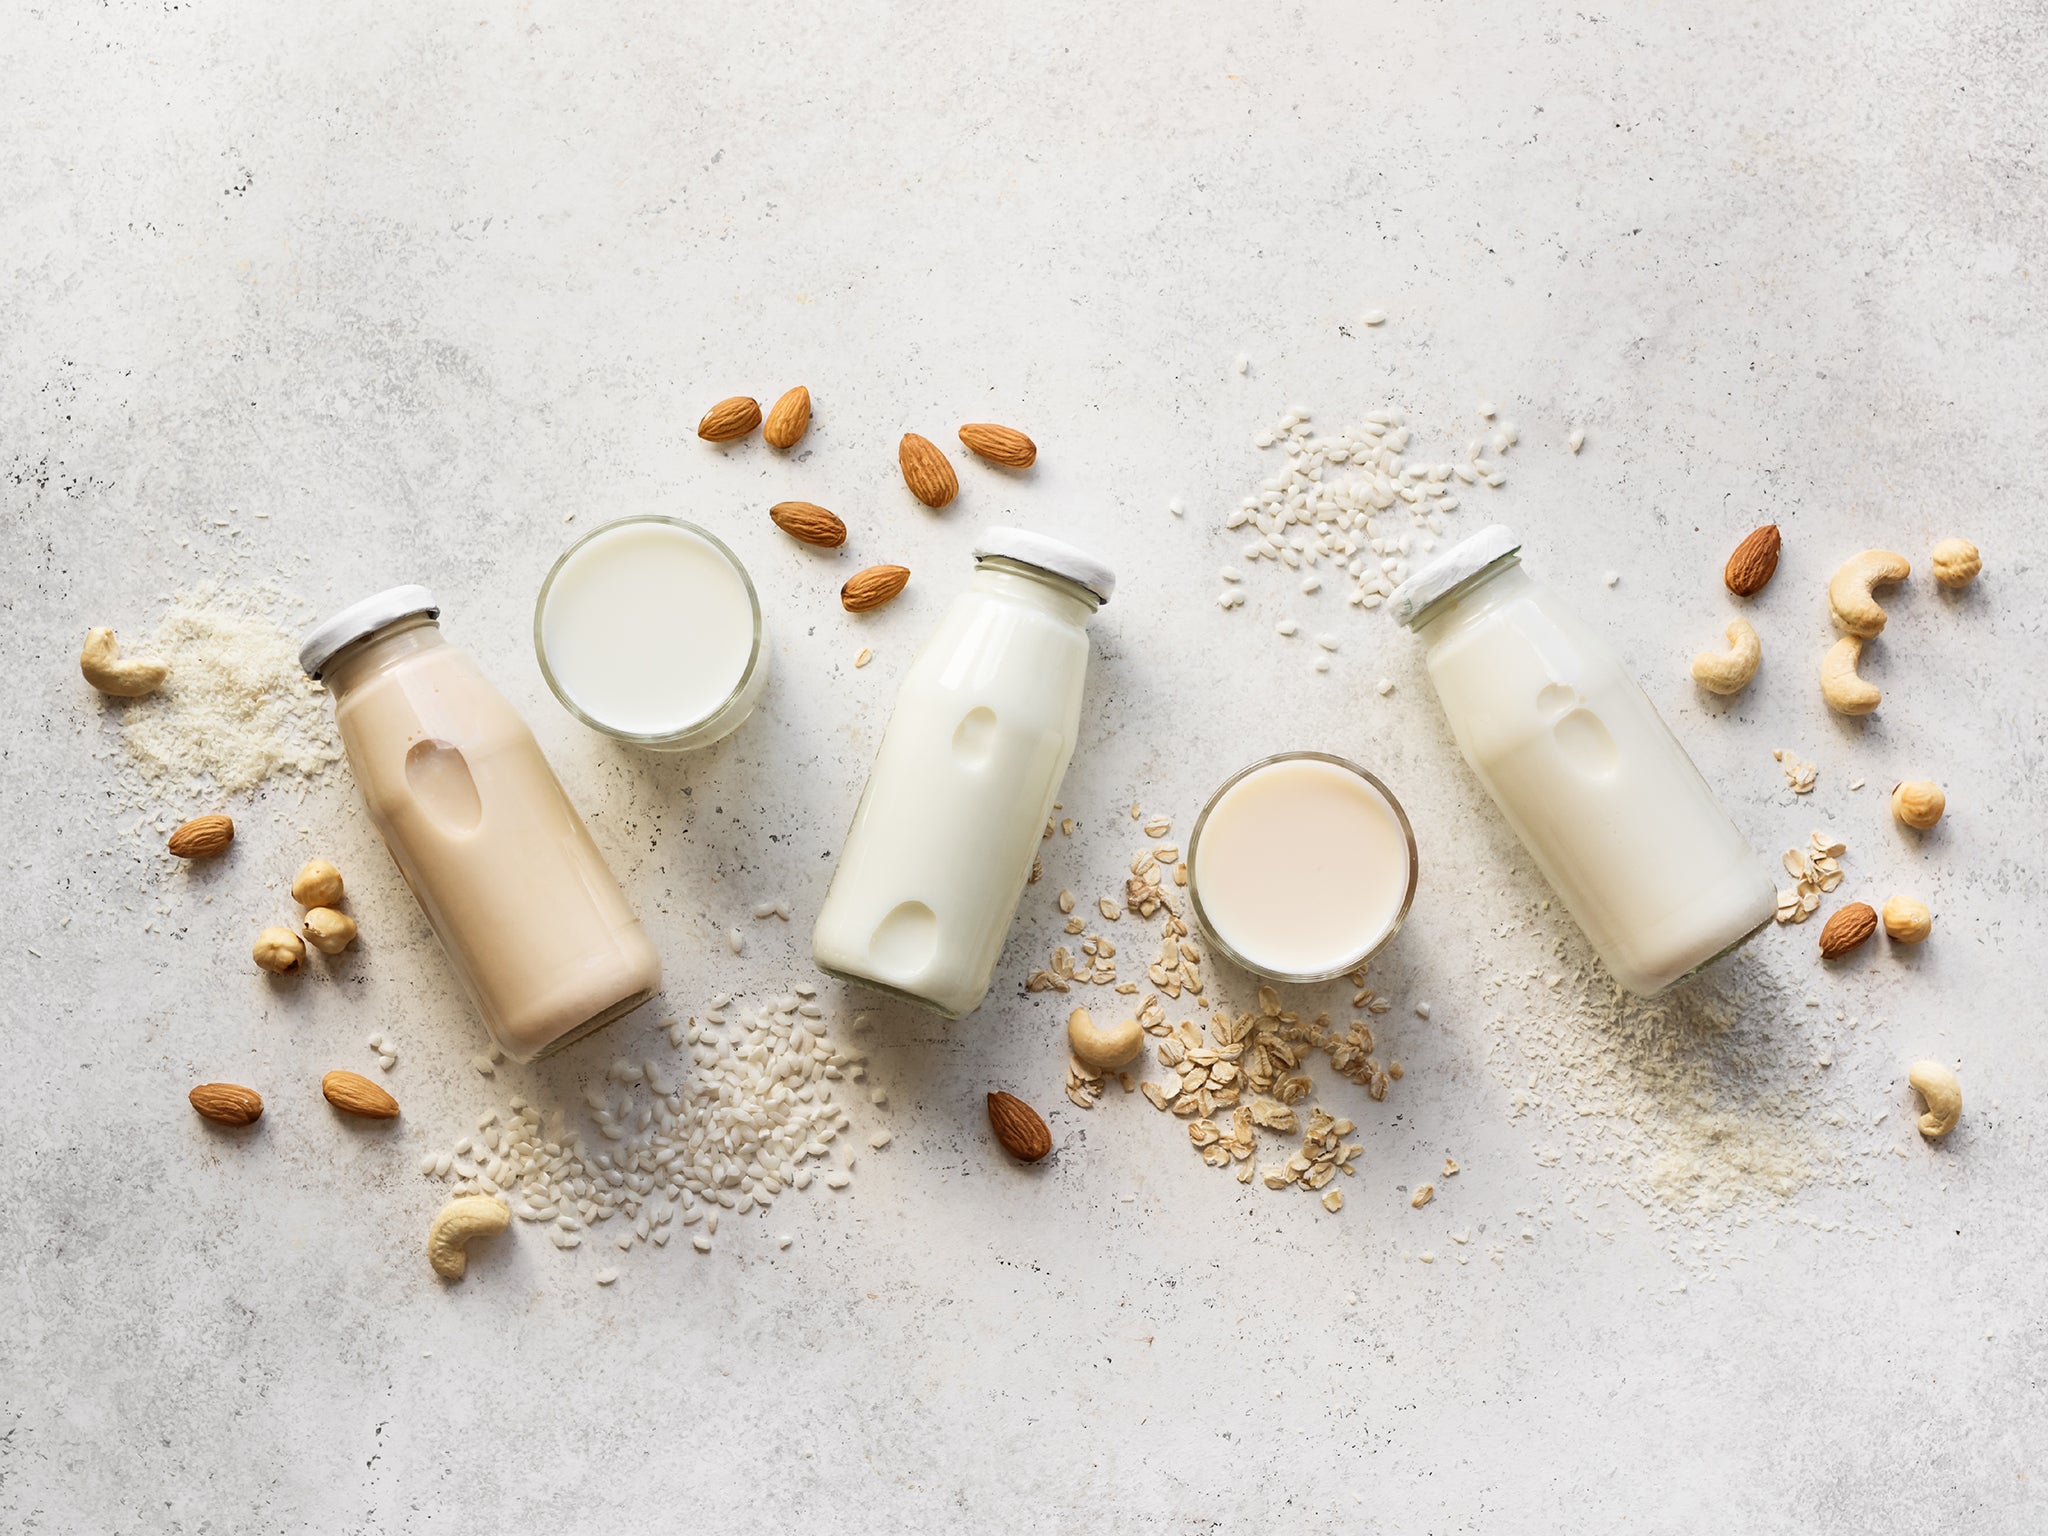 Legumes, cereals, nuts and seeds are now all being used to produce alternatives to cow’s milk